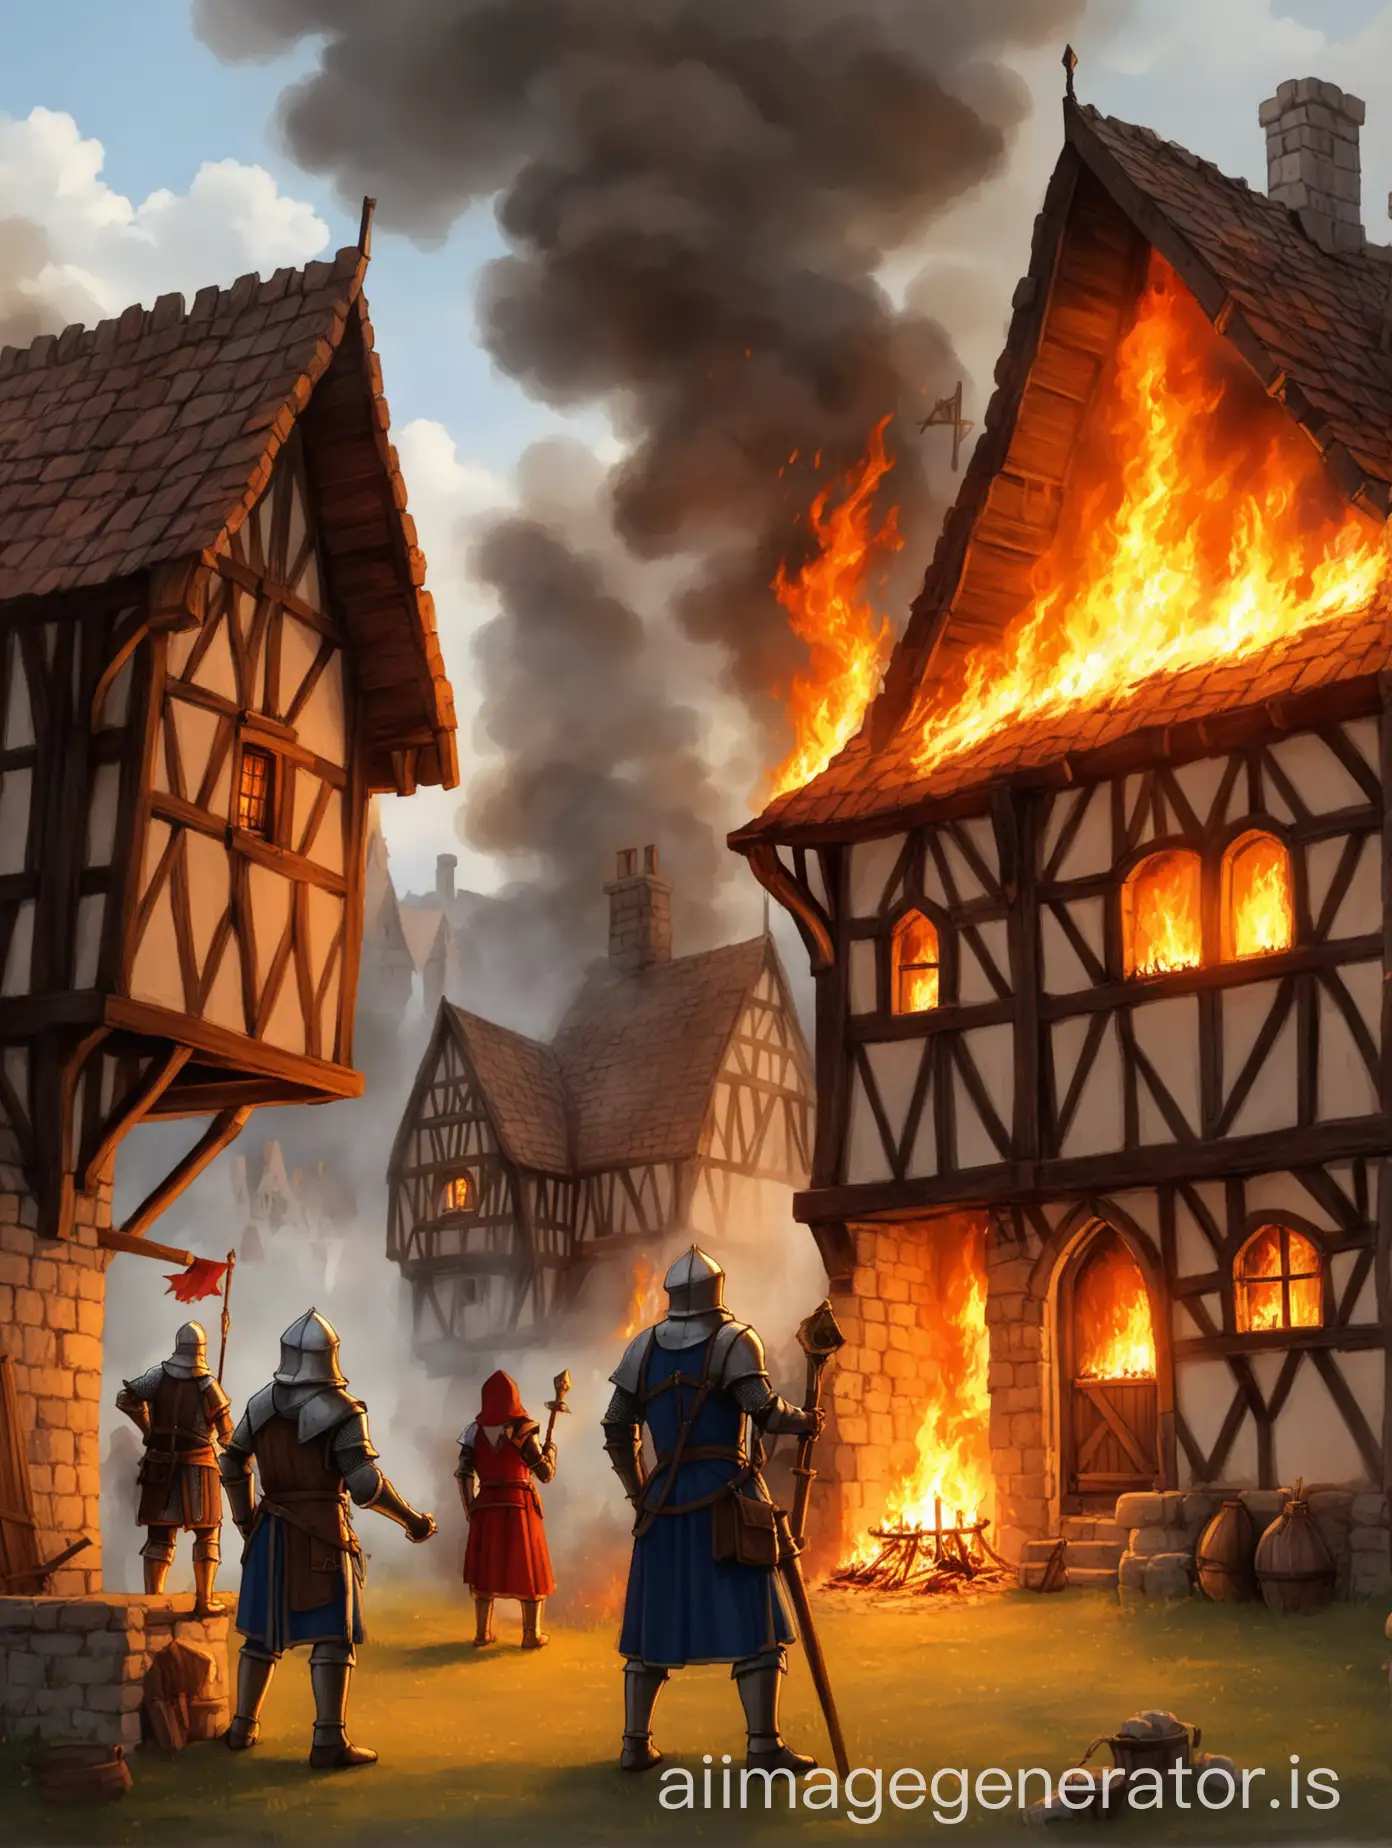 2 adventurers are watching someone else's house catch fire on fantasy/medieval